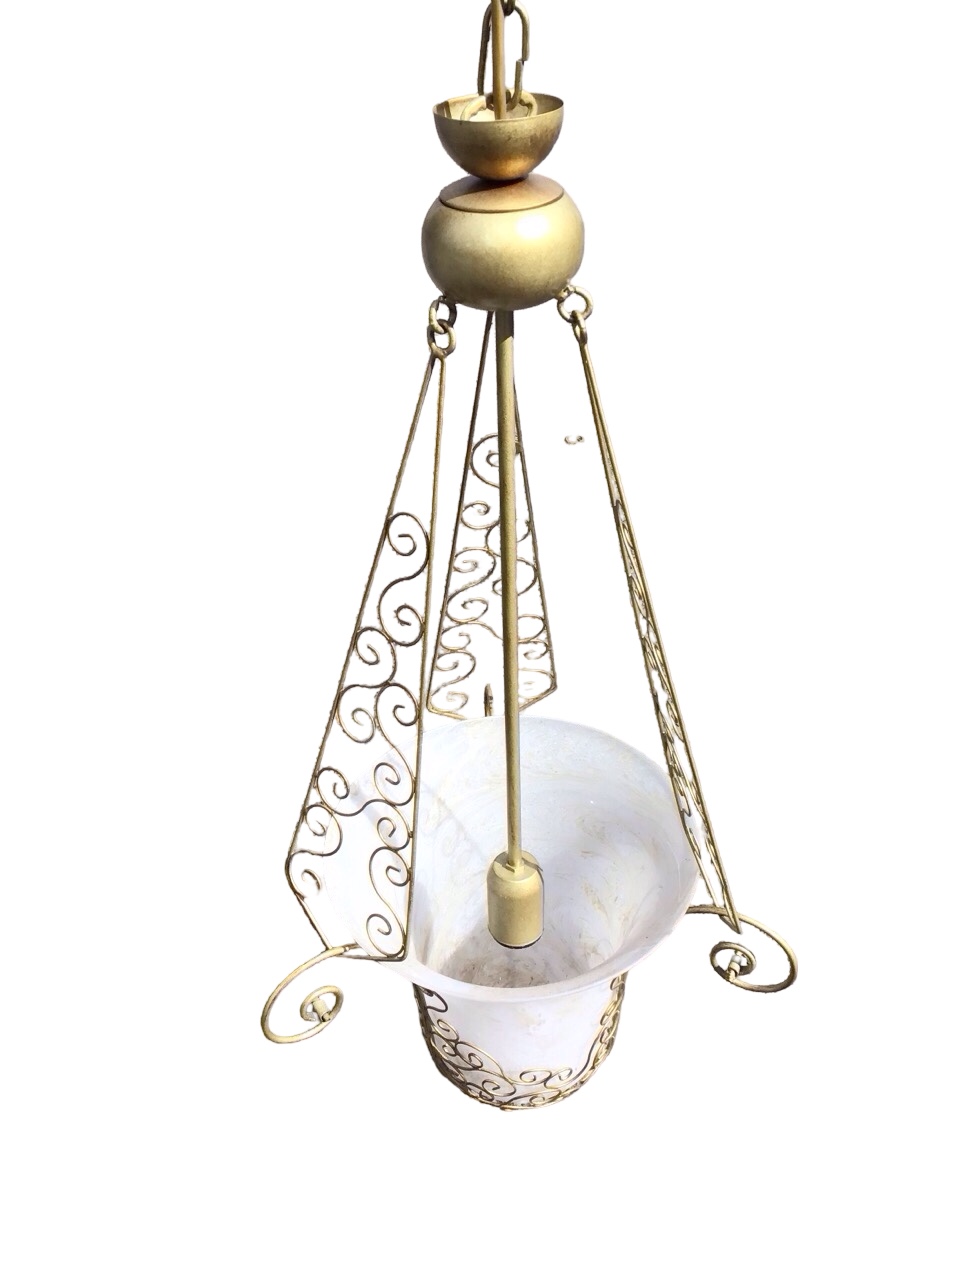 A gilt wirework and glass hanging light with bell shaped ceiling rose and chain suspending three - Image 3 of 3